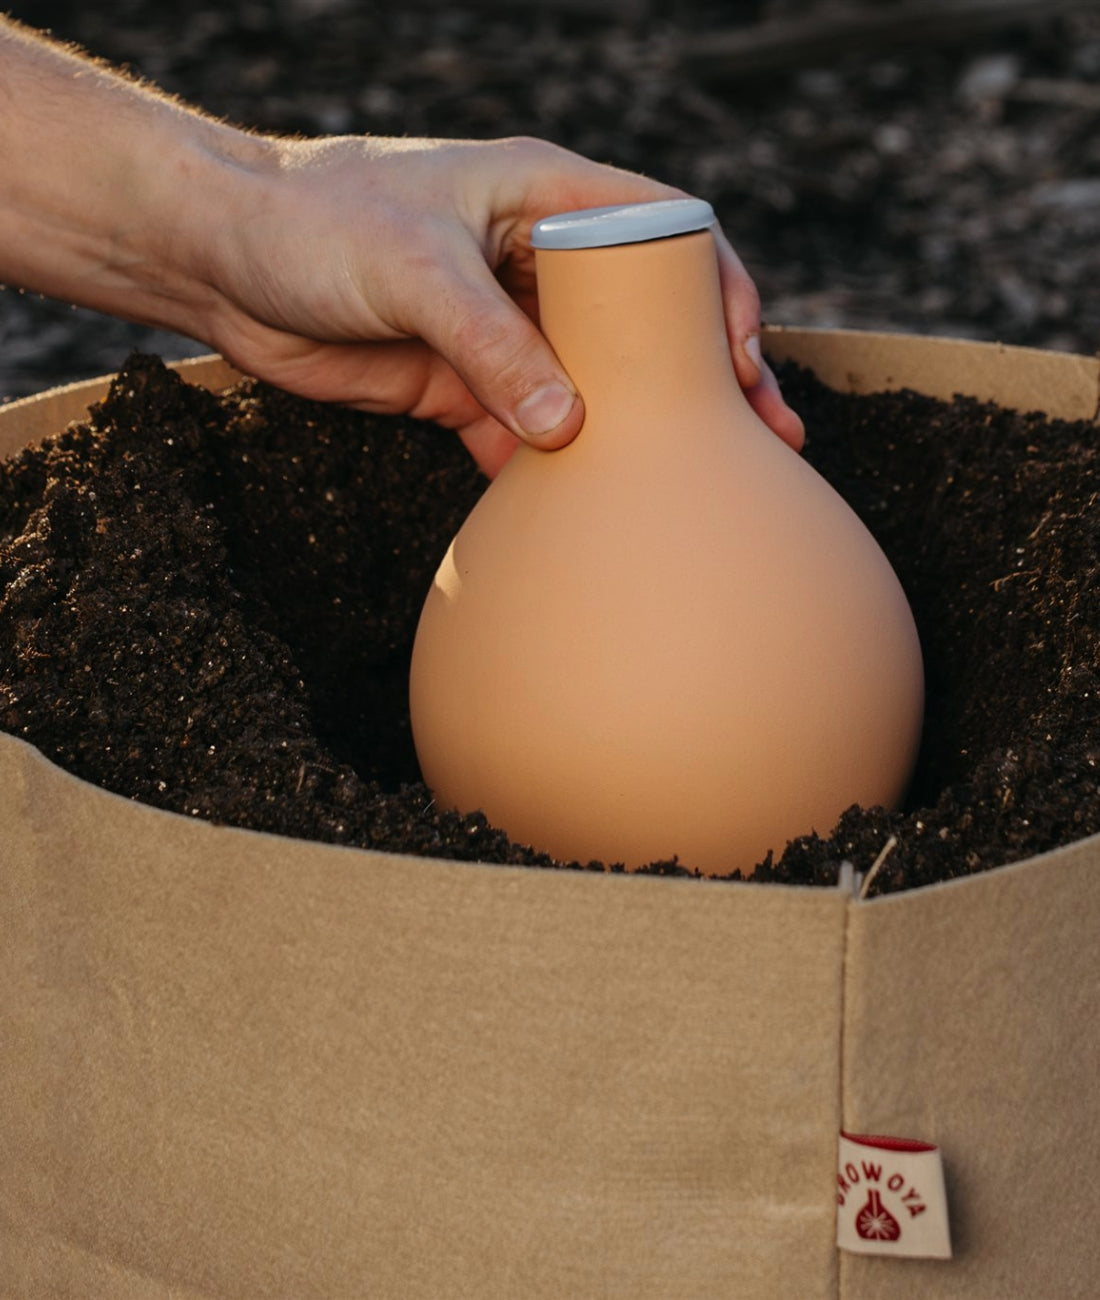 Discovering the Benefits of Ollas: A Guide to Installing Oya™ Watering Pots